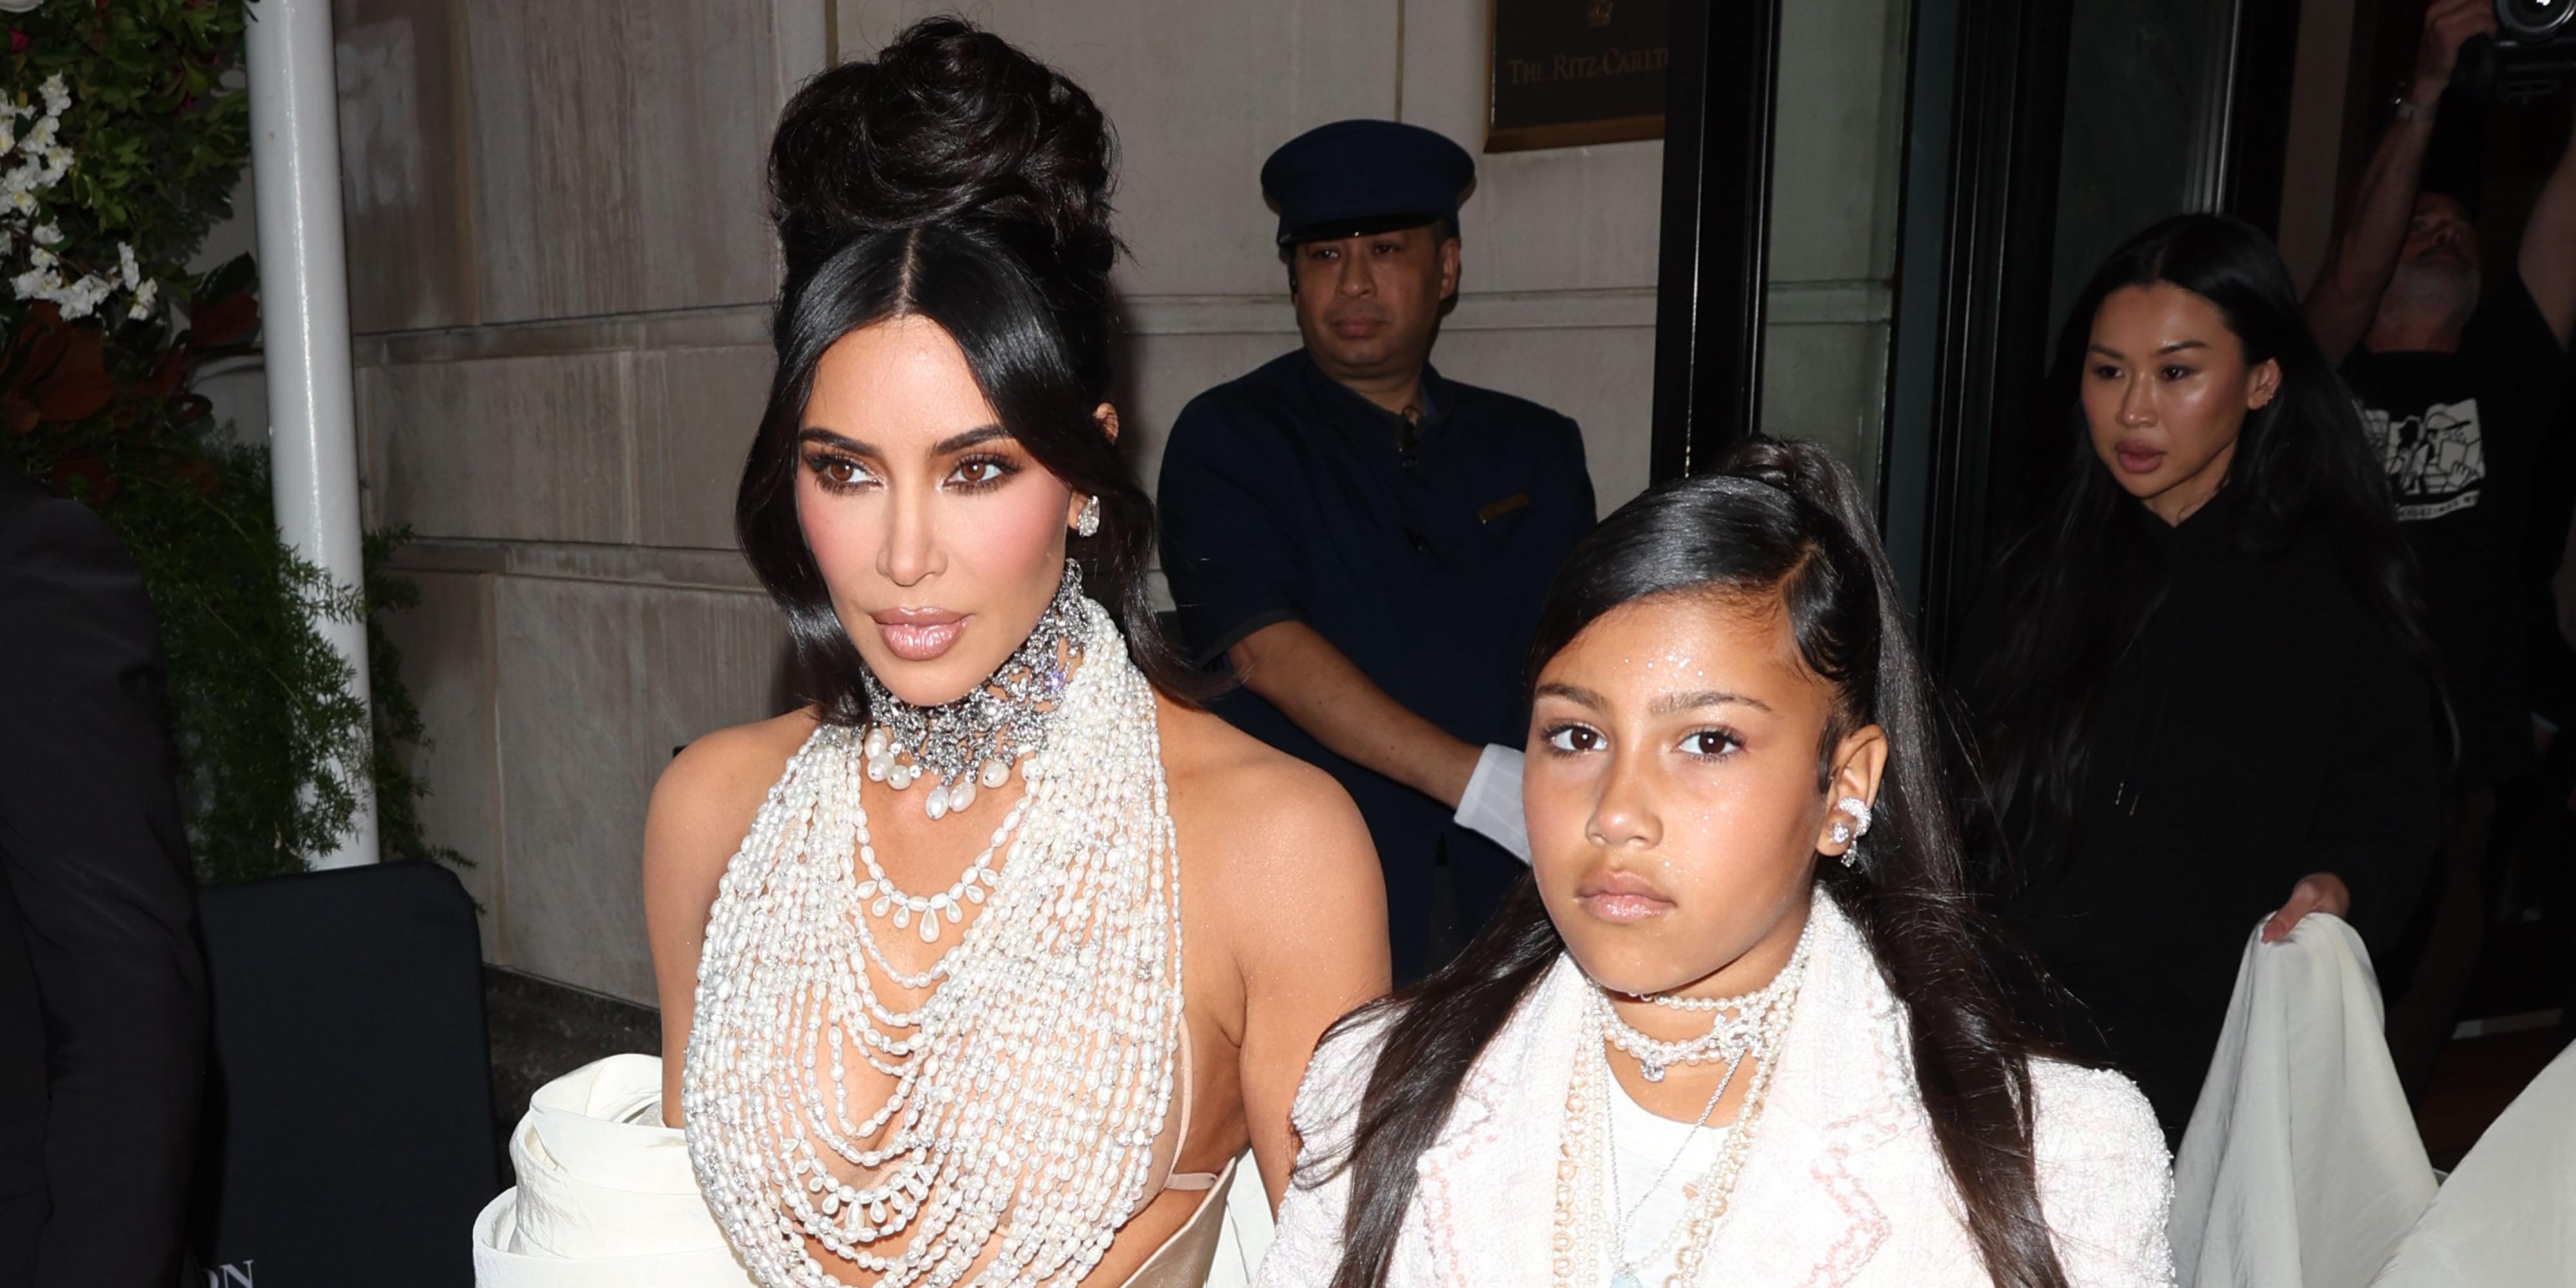 North West's Chanel Tweed Jacket and Jeans at Met Gala 2023